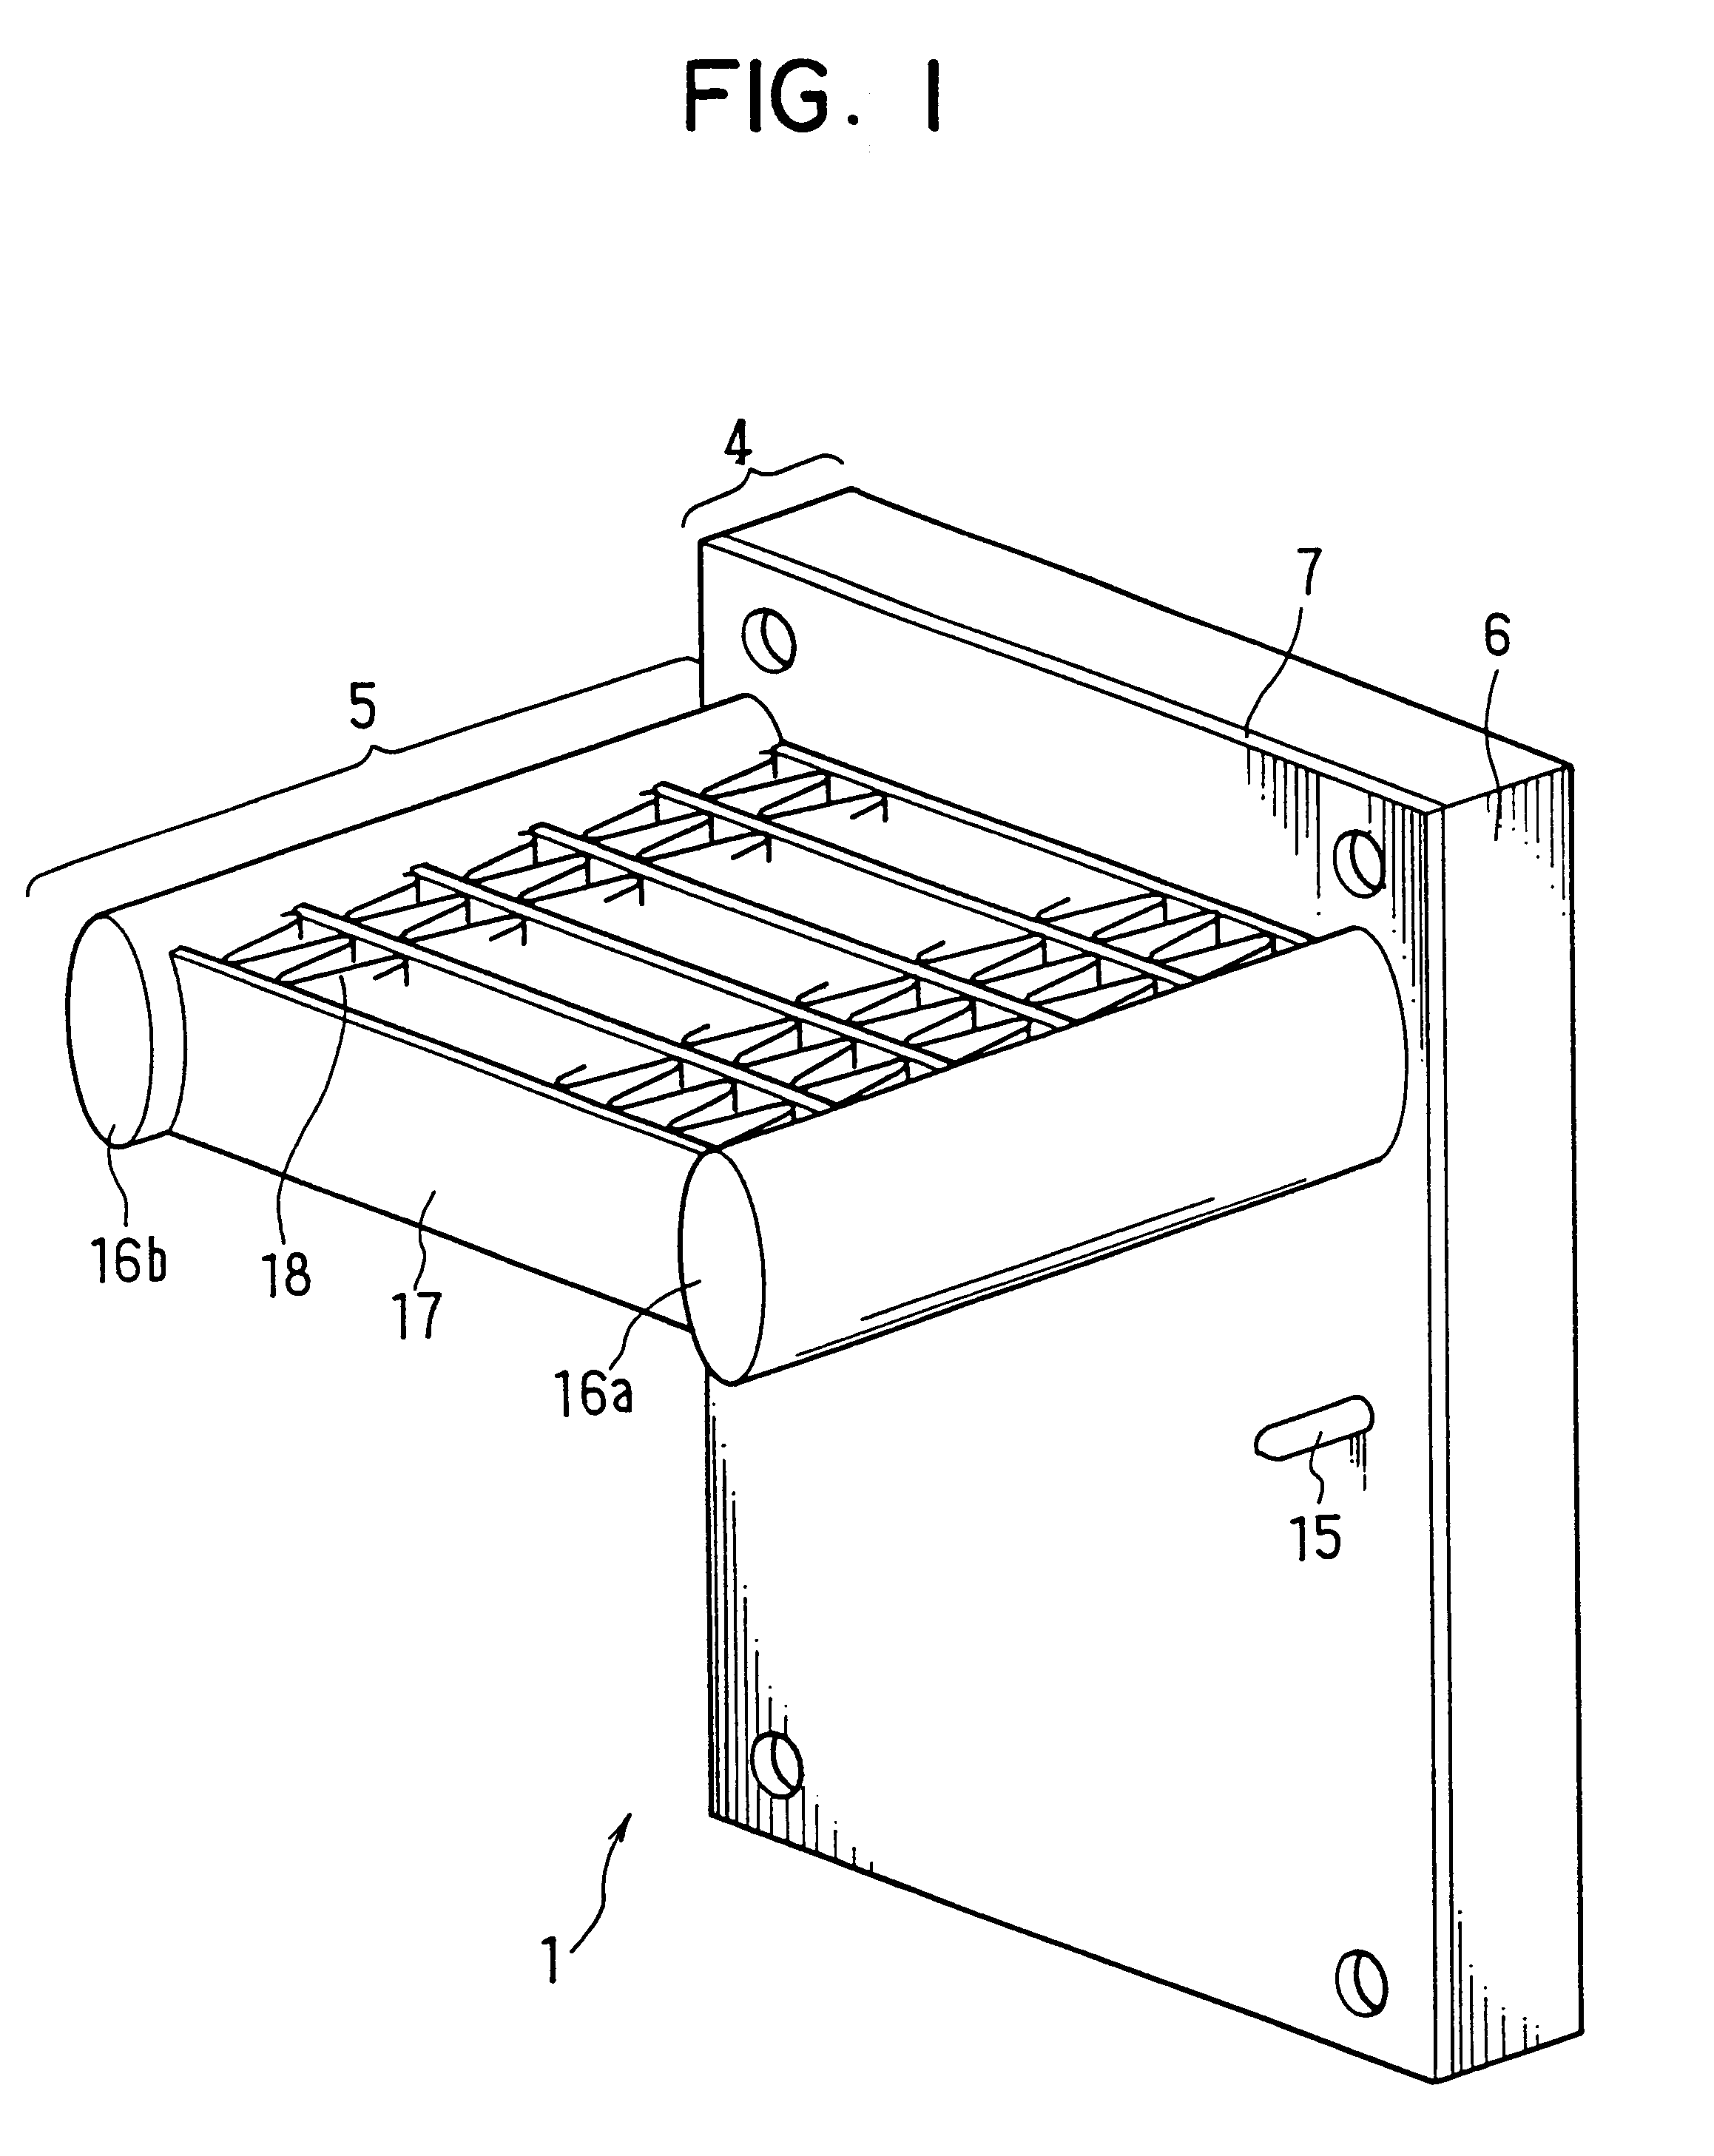 Cooling apparatus using boiling and condensing refrigerant